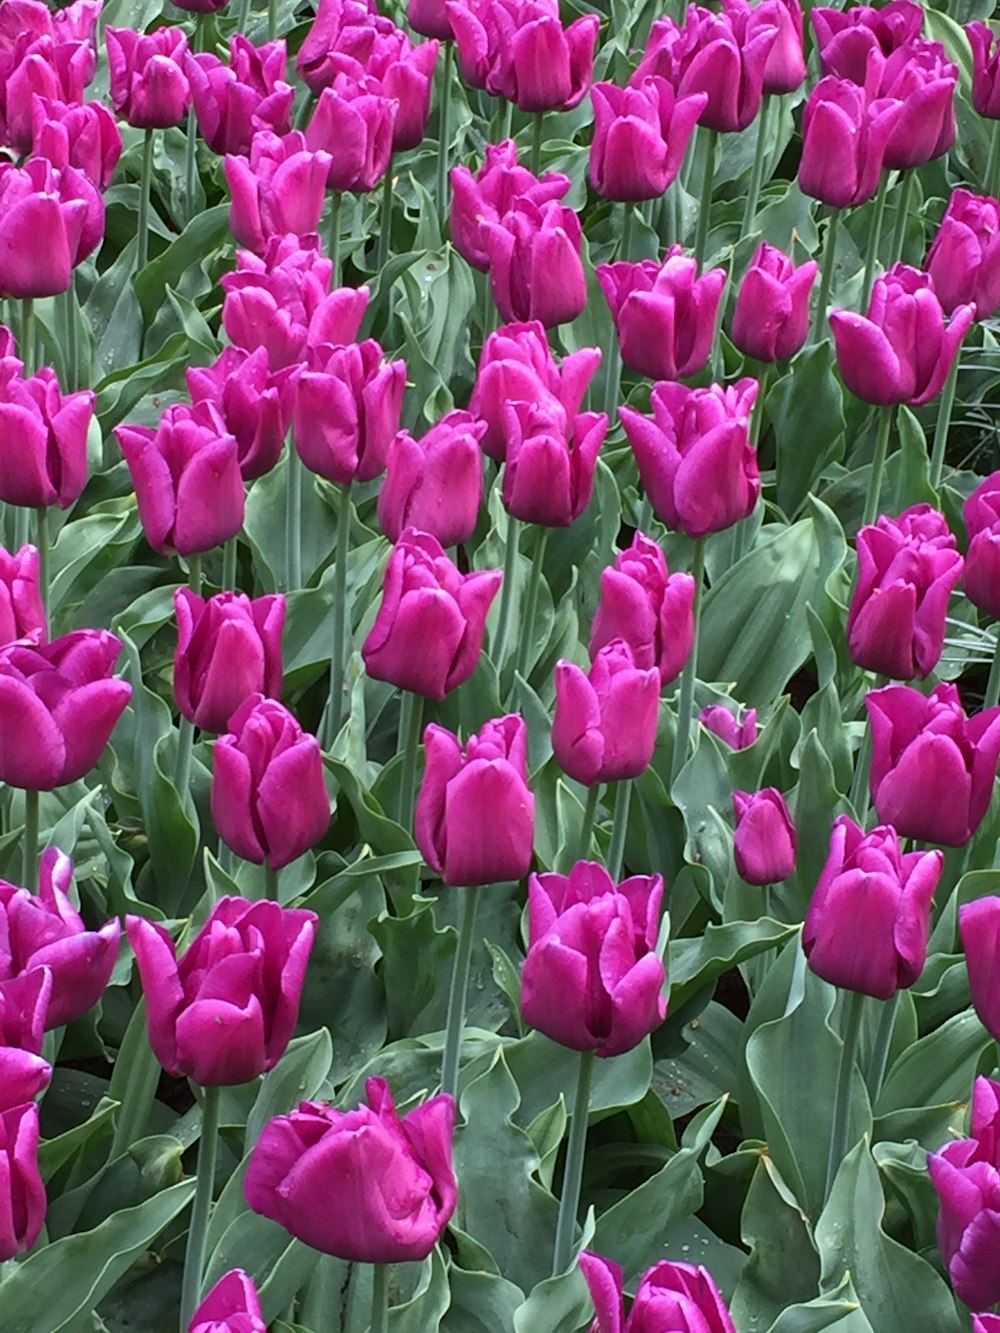 purple tulips in bloom during daytime